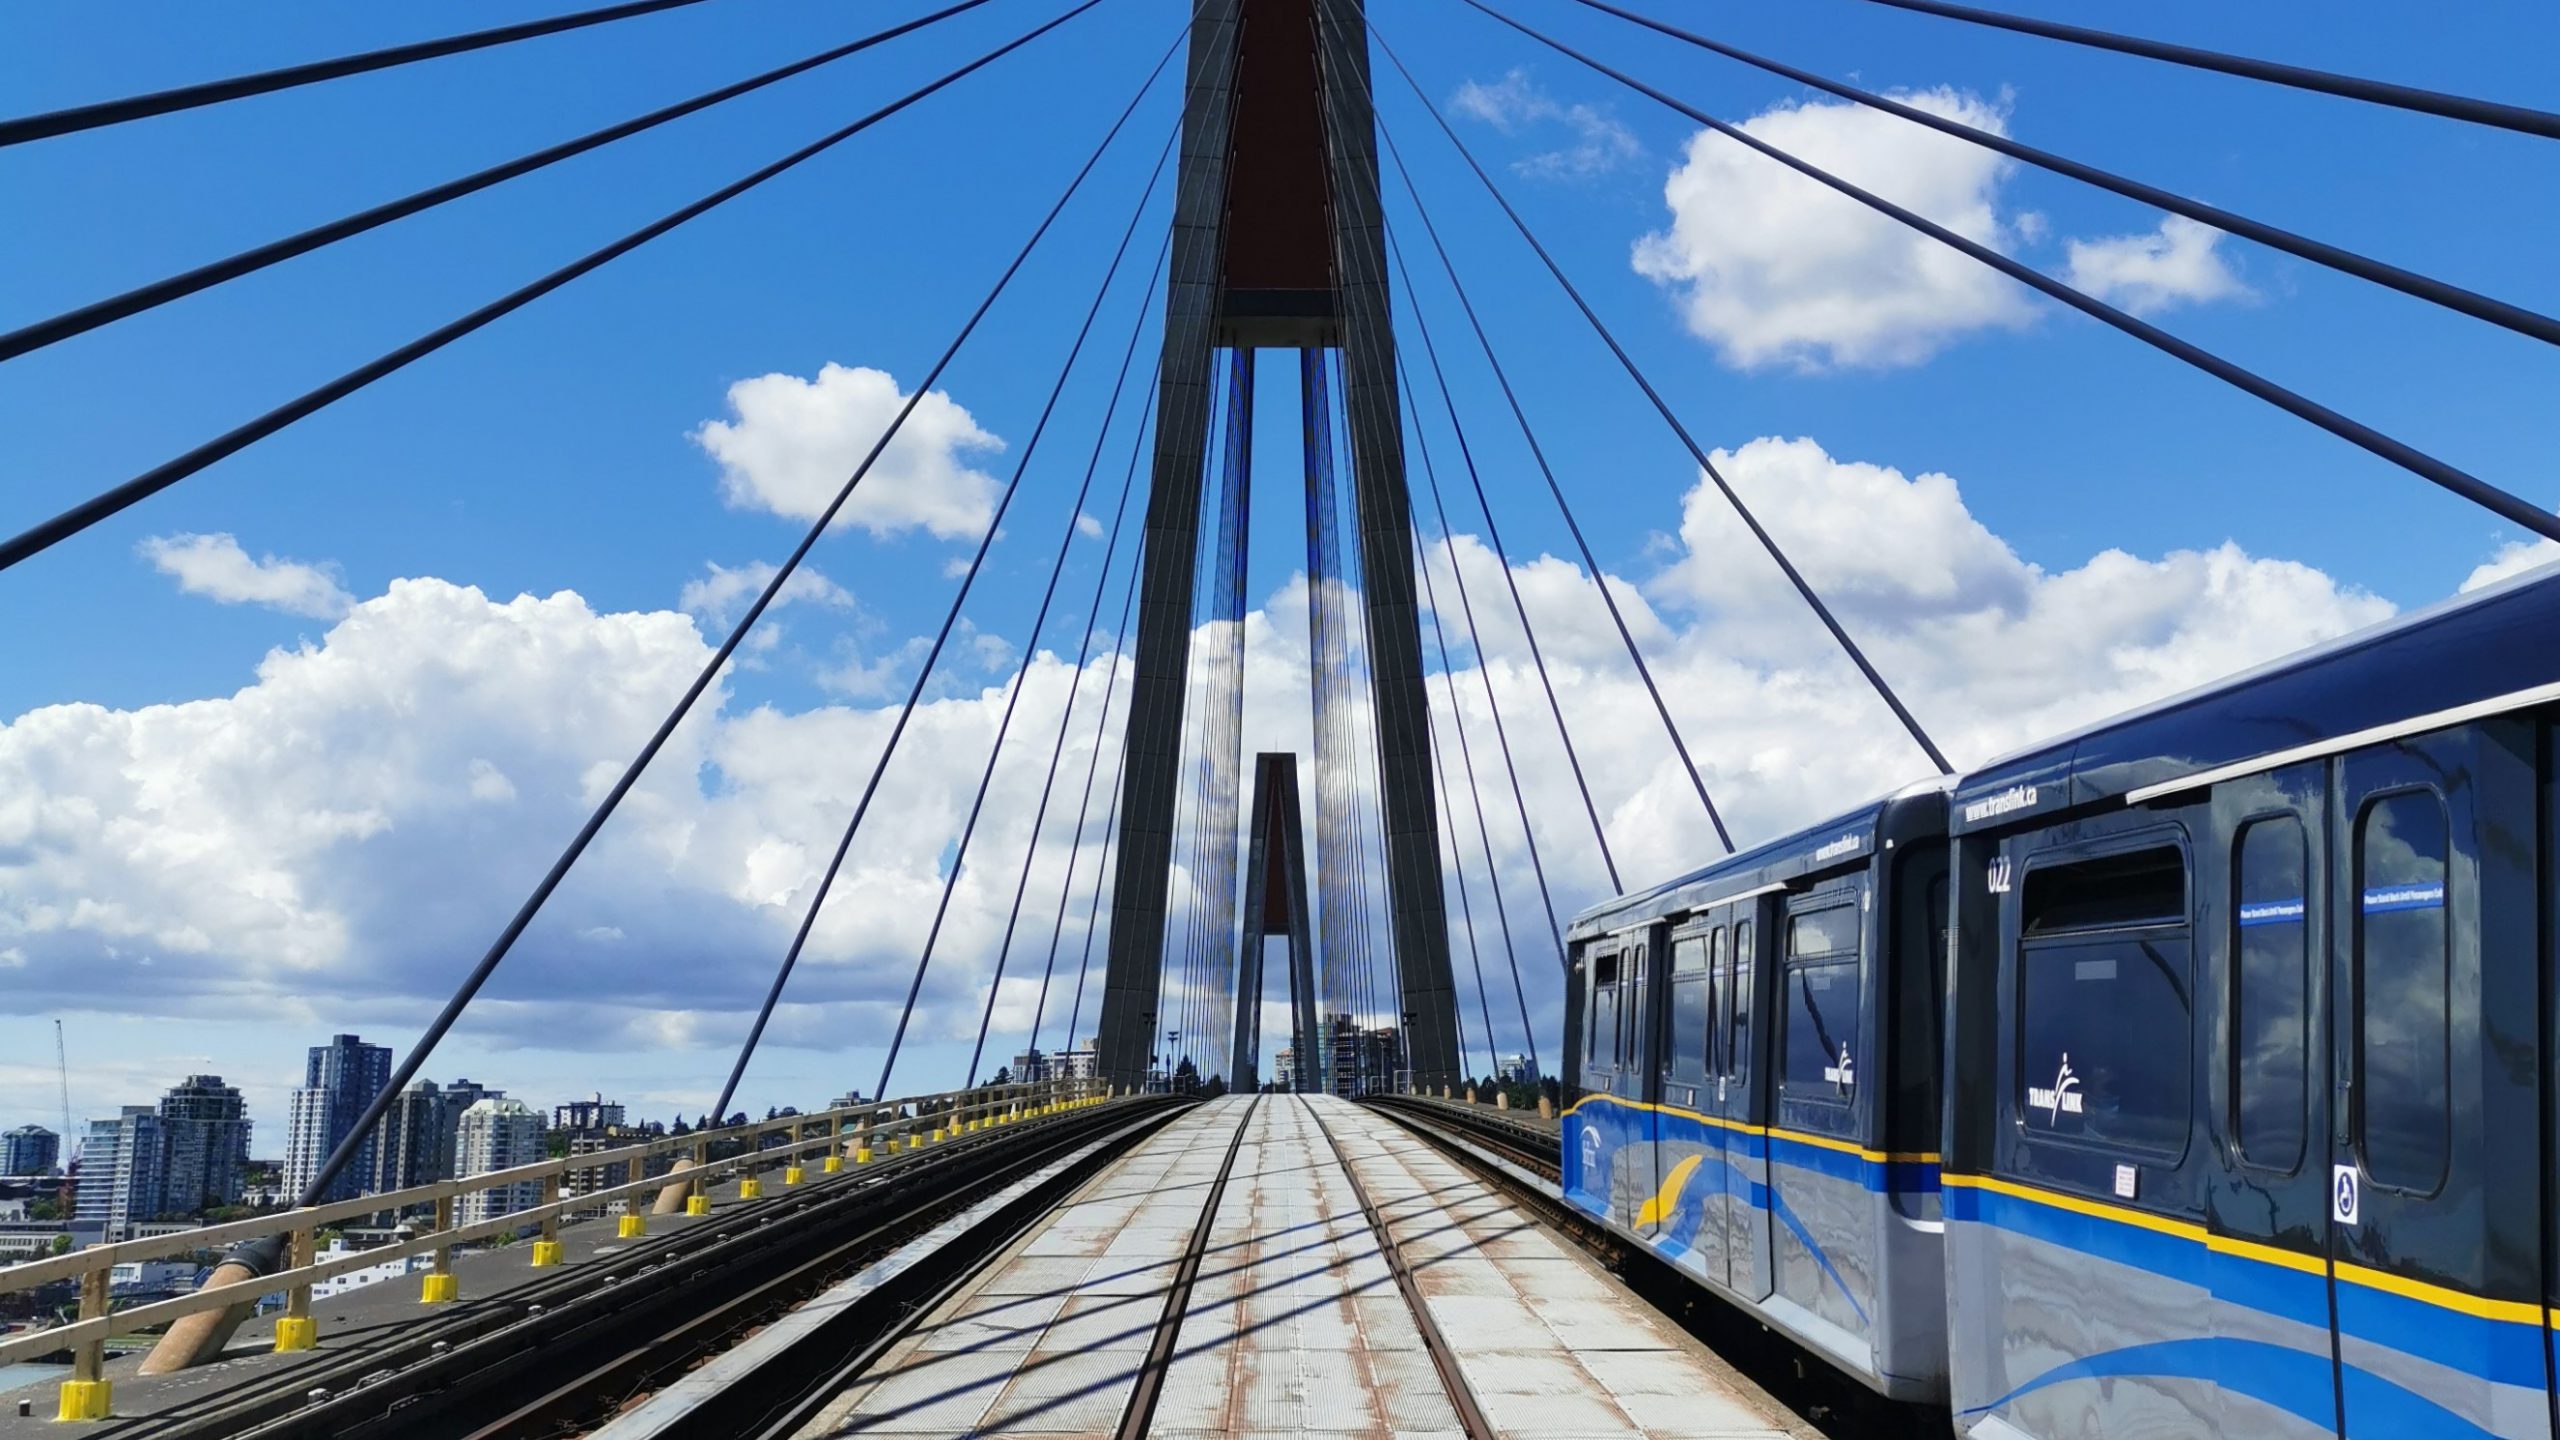 The SkyTrain travelling inbound on the SkyBridge